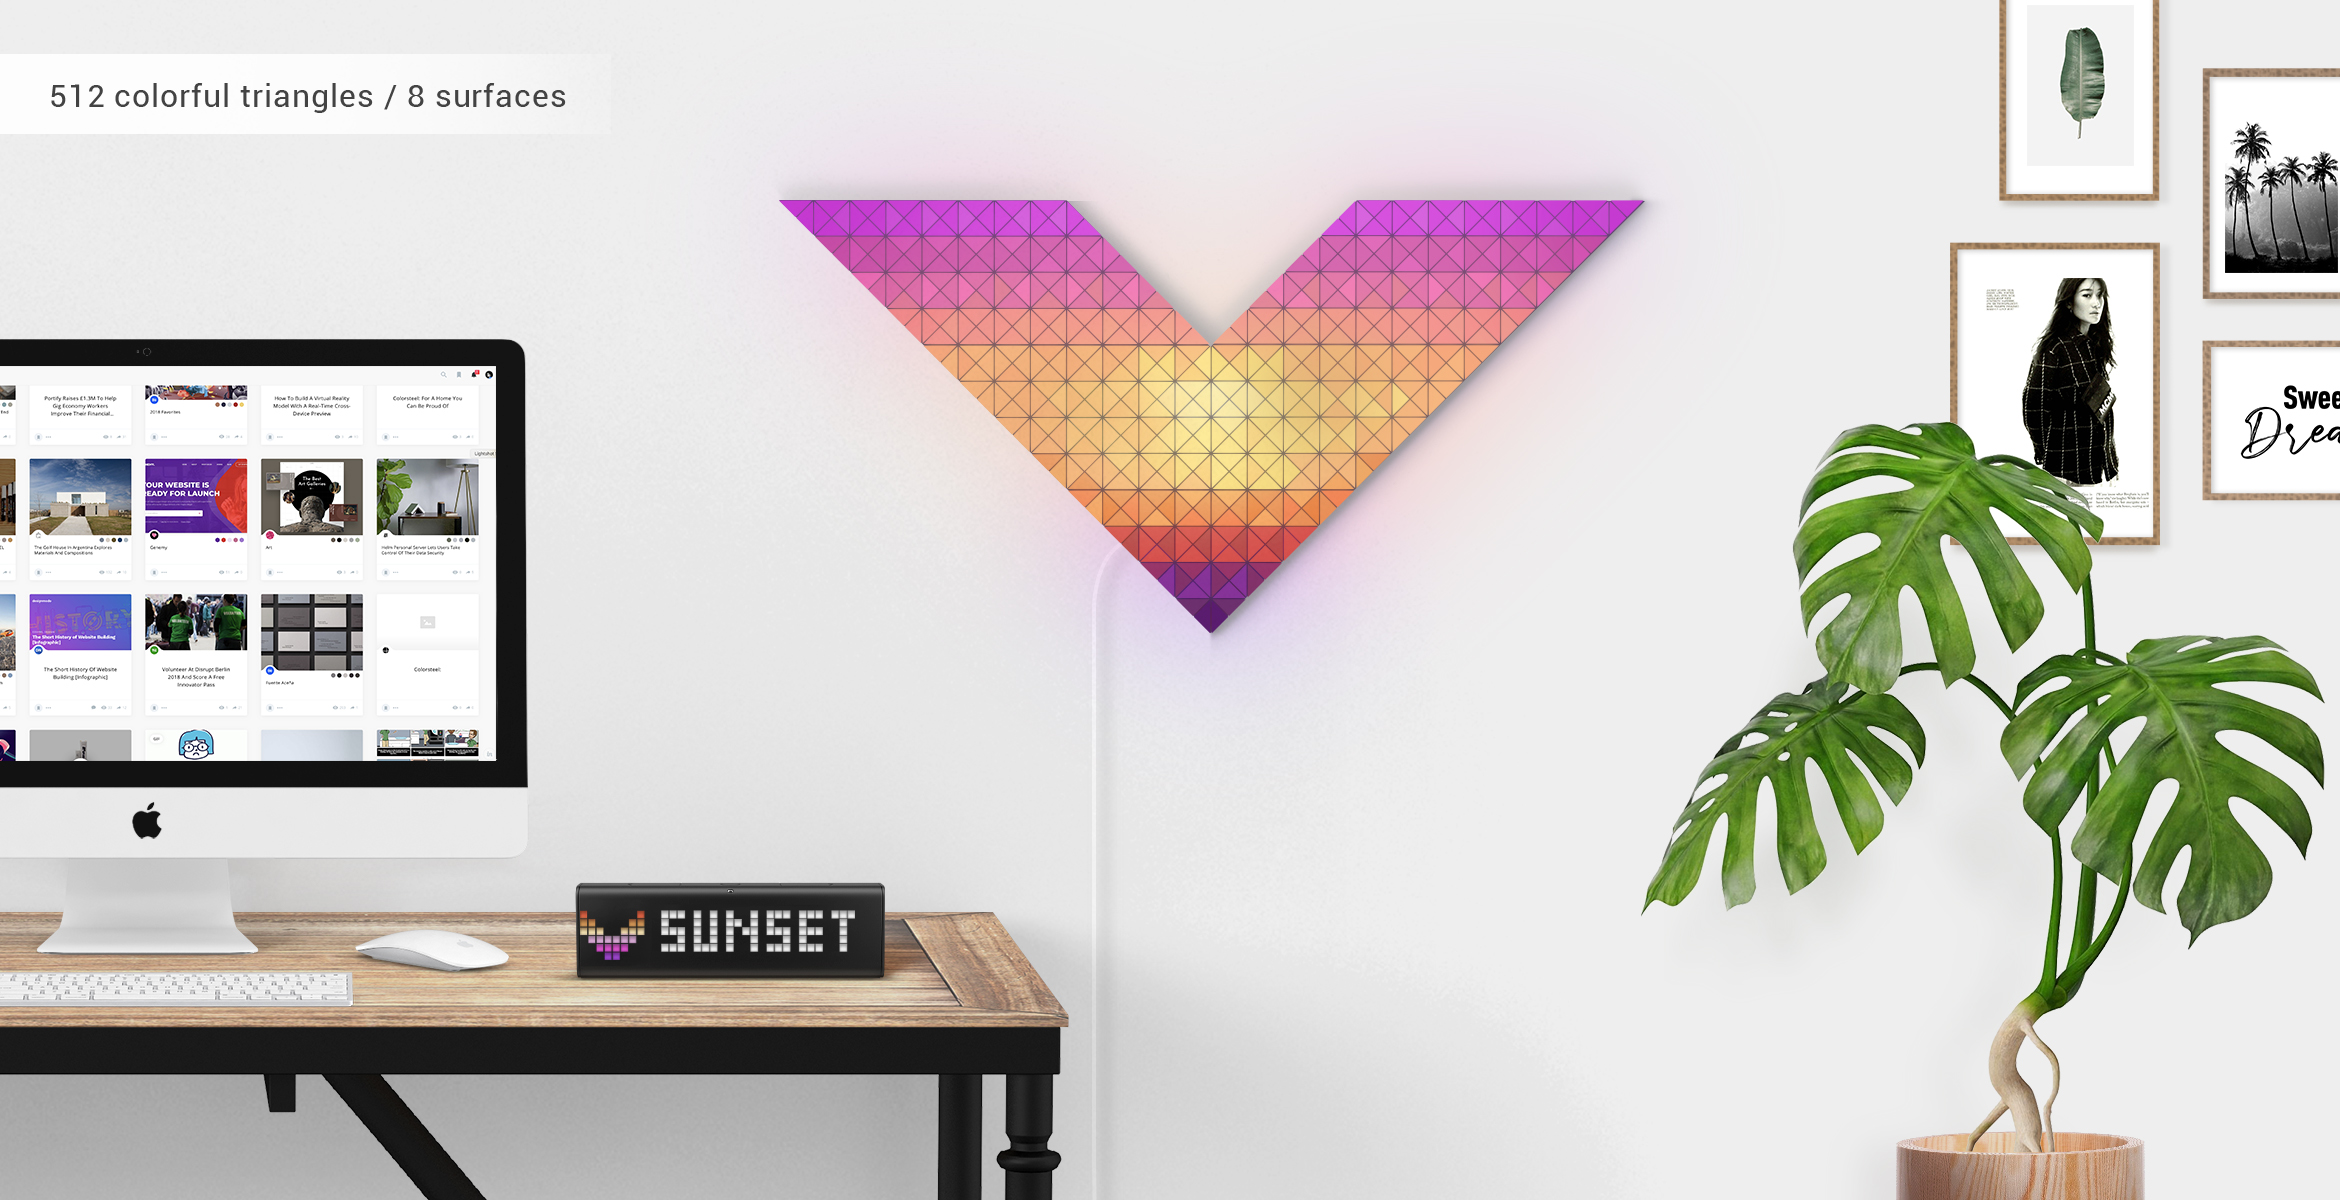 Vendetta shape, assembled from 8 LaMetric SKY smart light surfaces, complements the desk setup and shows sunset light effect